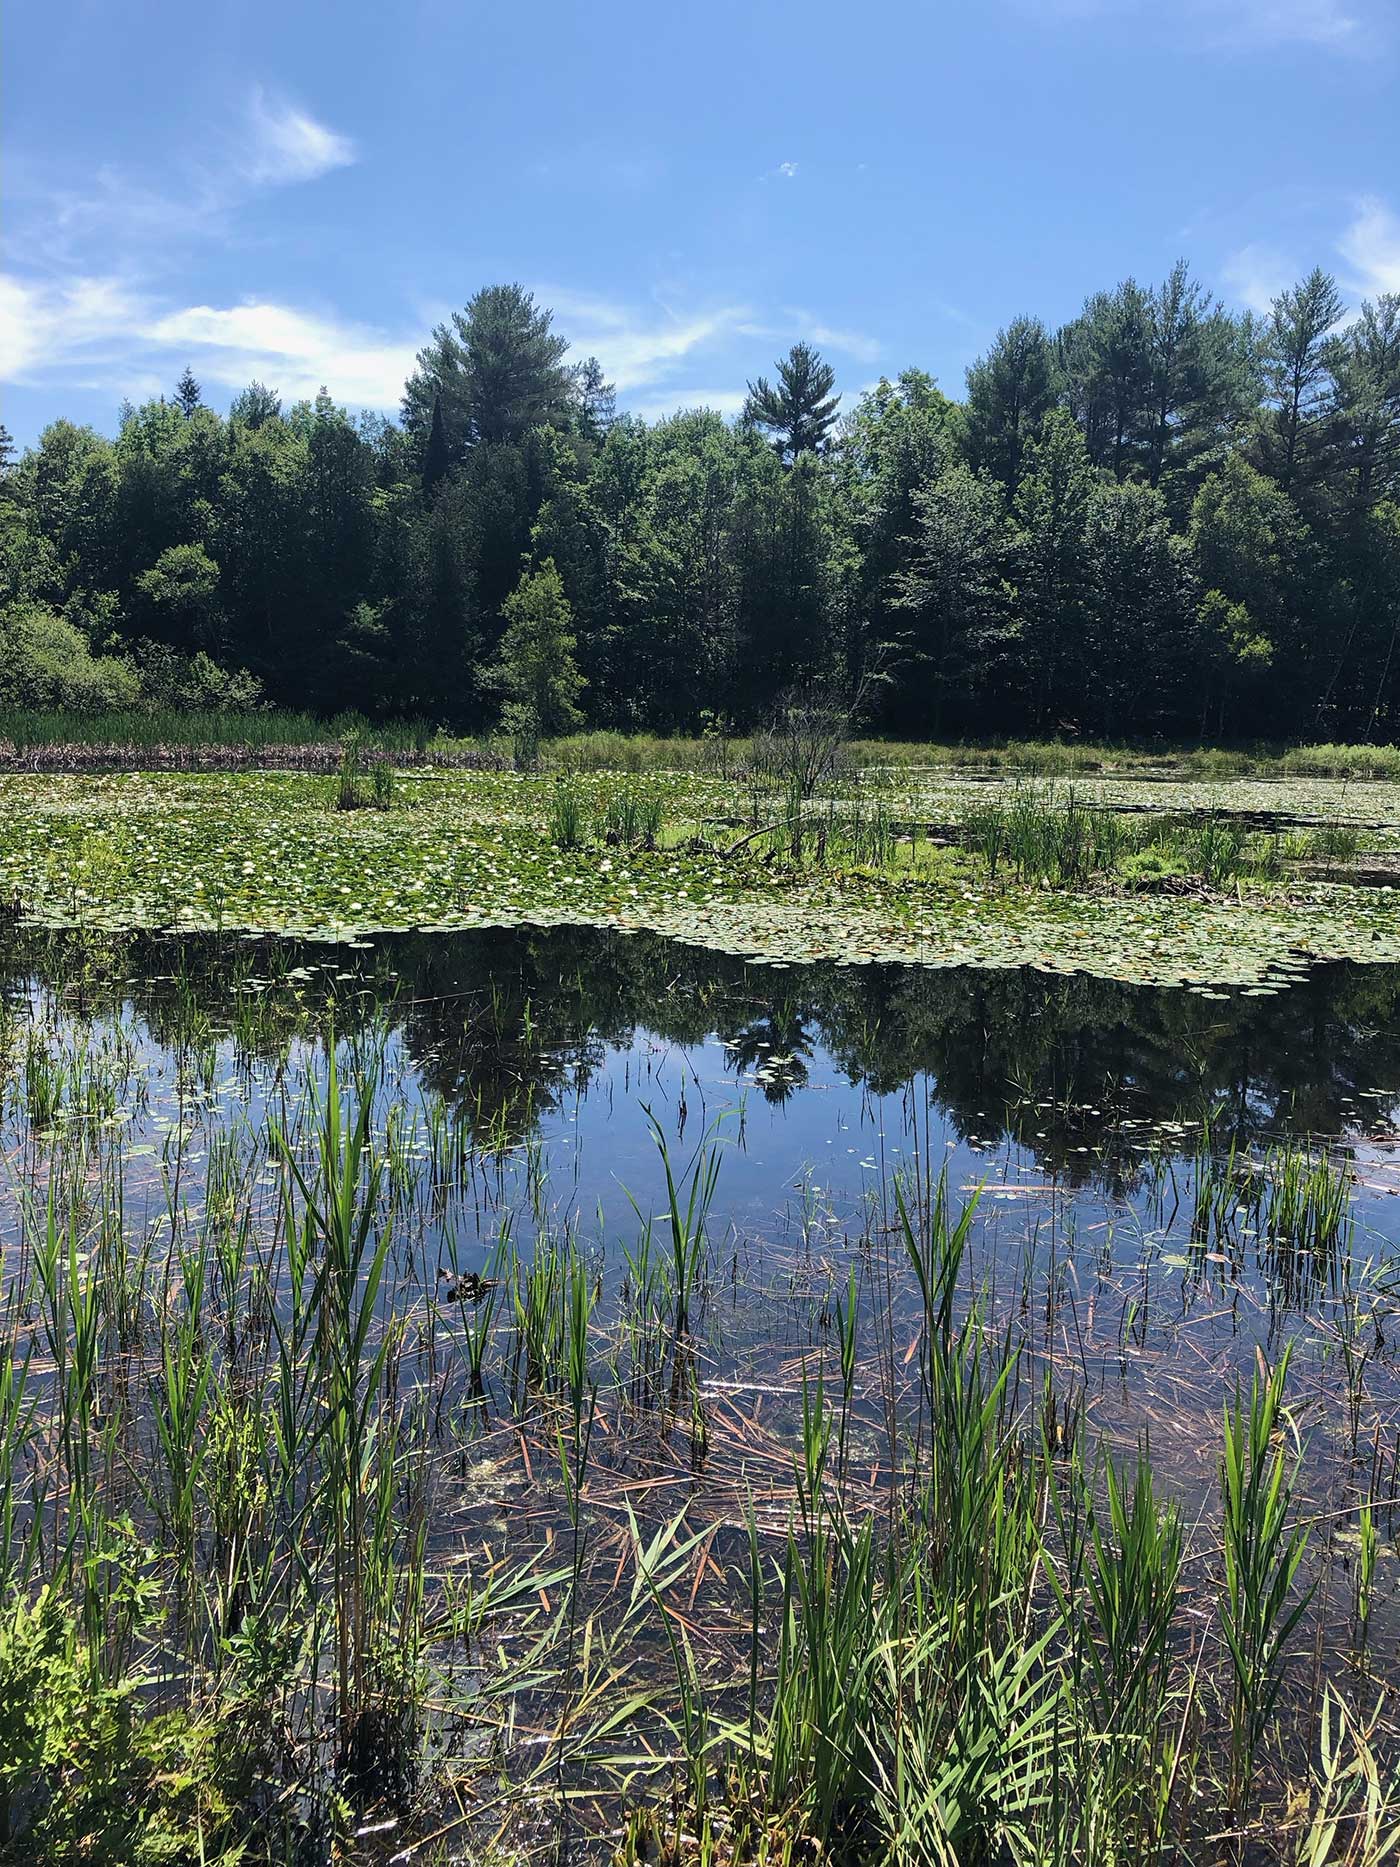 Cornville fire pond with water lilies in it